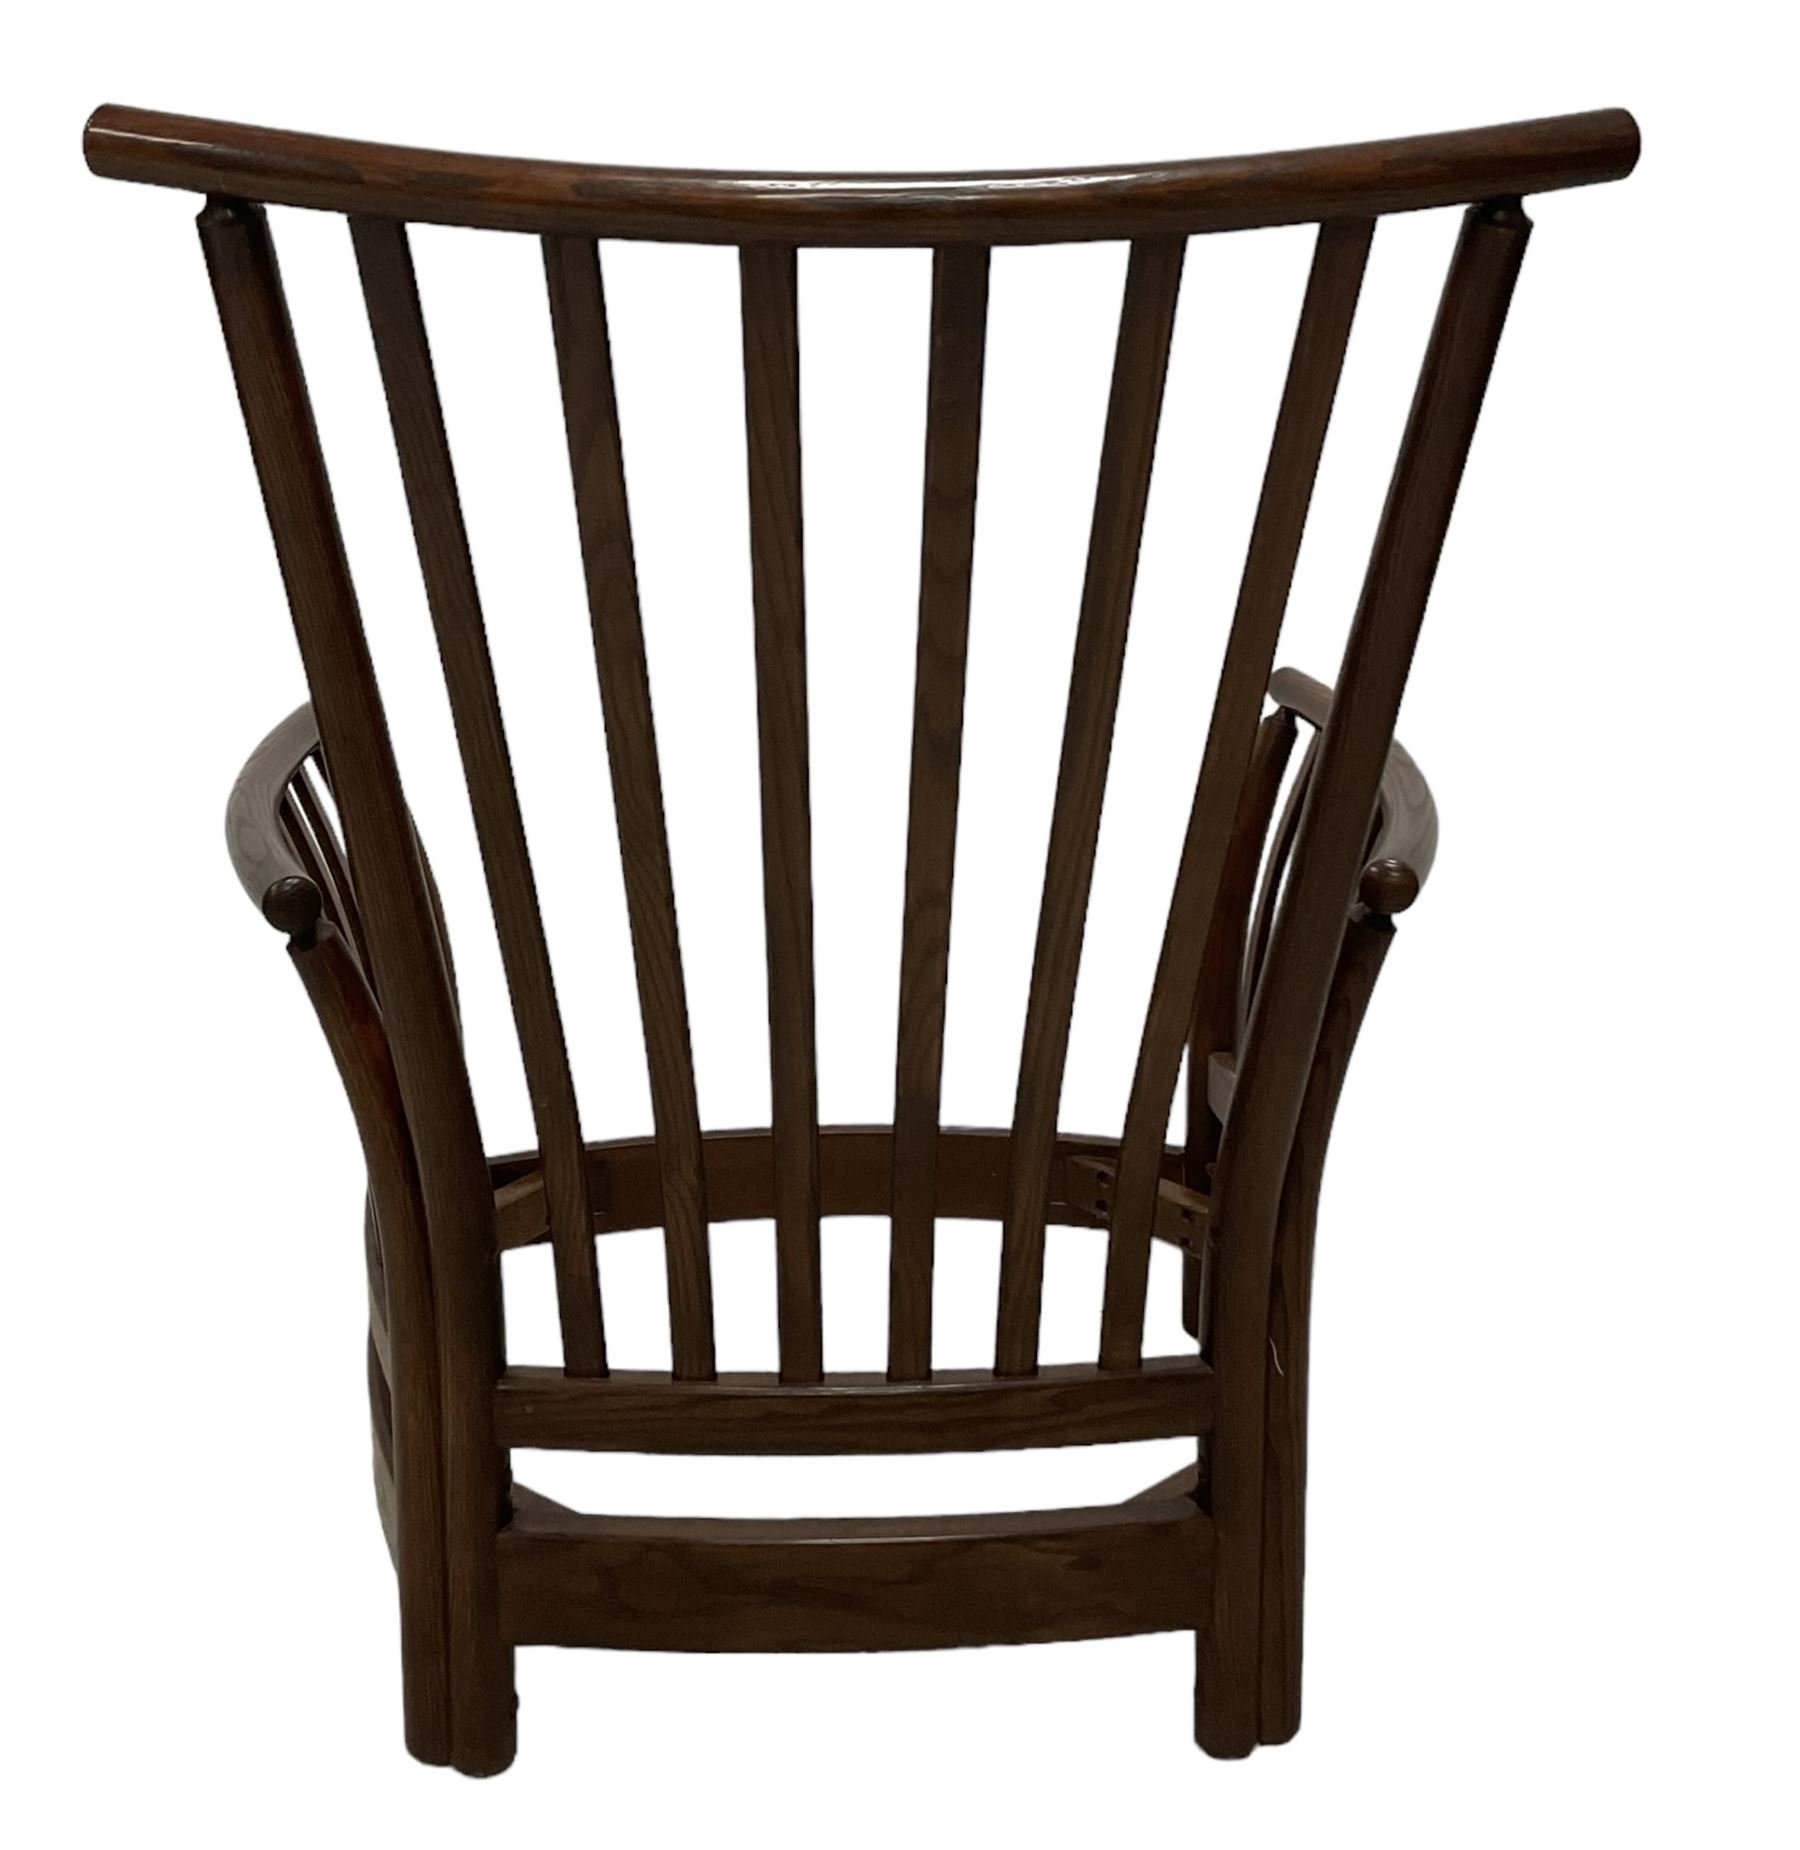 Ercol - mid-20th century elm and beech 'Renaissance' armchair - Image 14 of 14